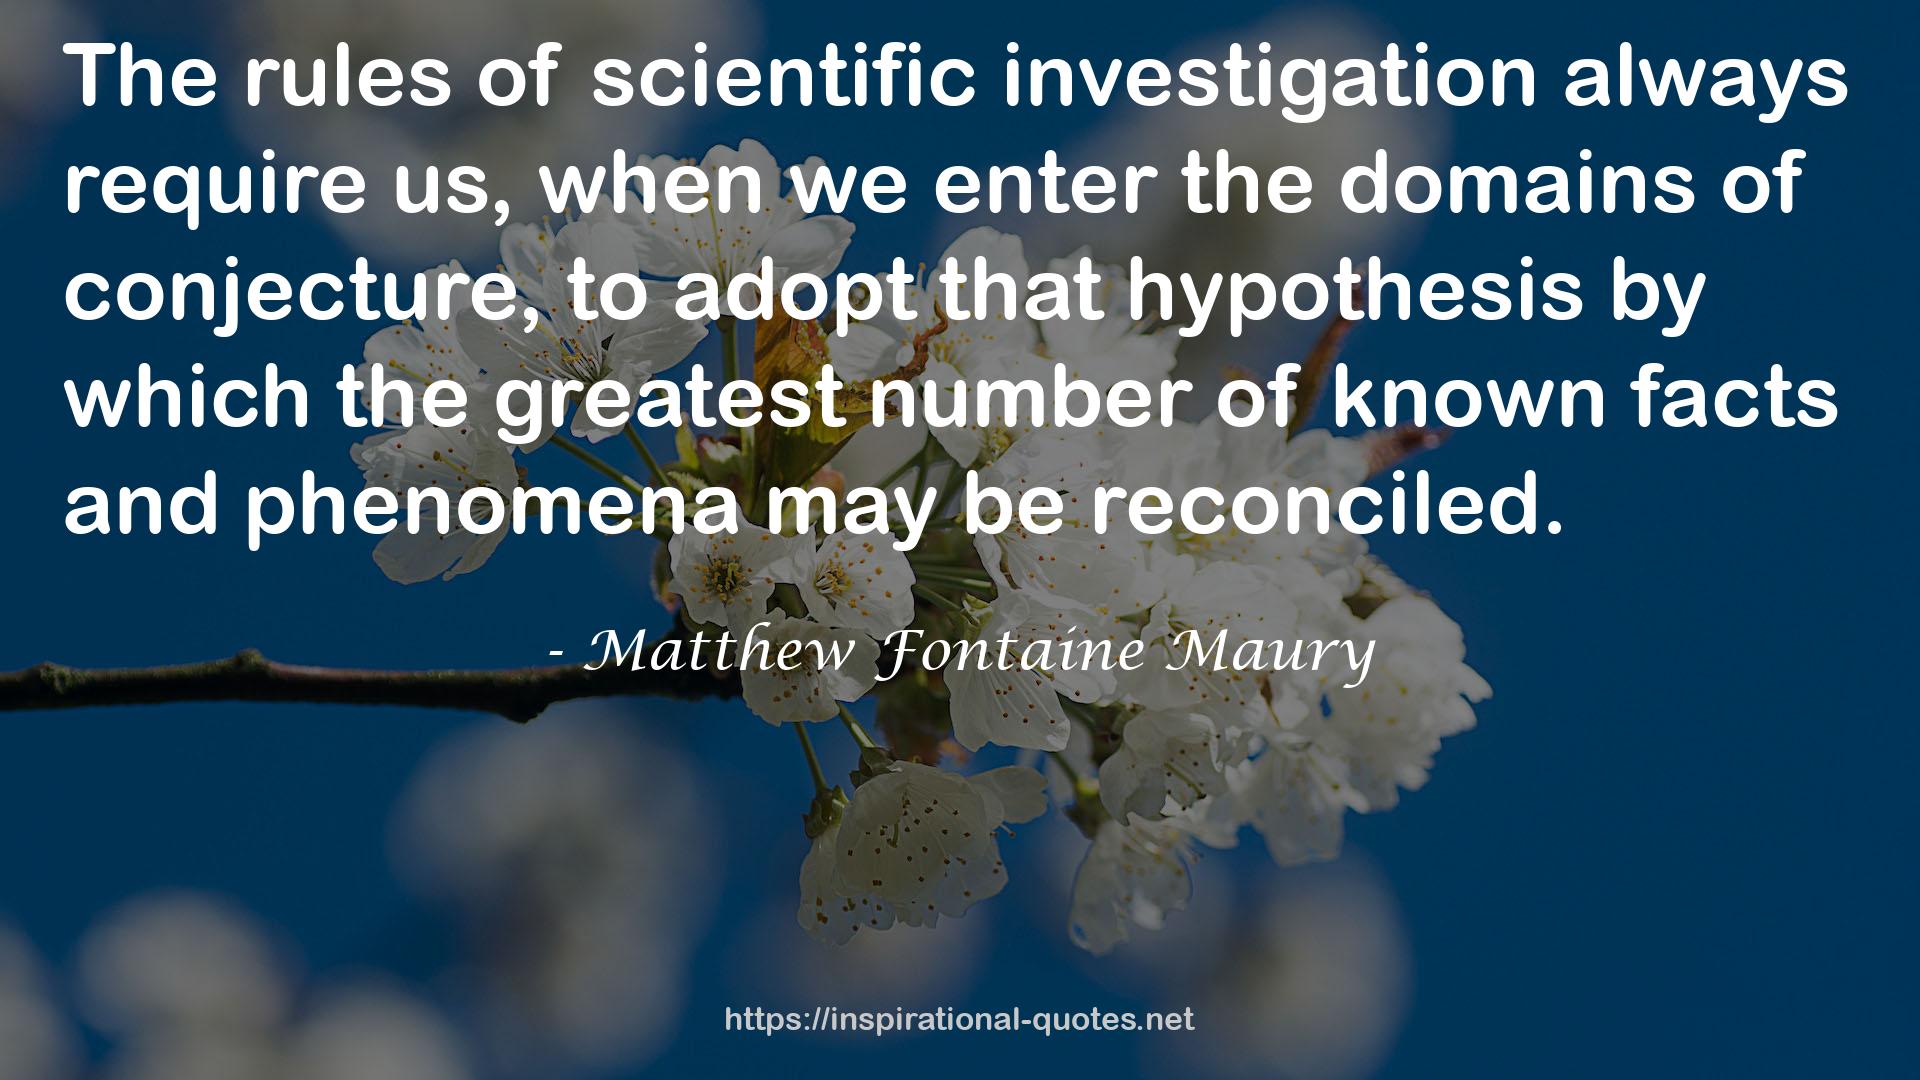 Matthew Fontaine Maury QUOTES